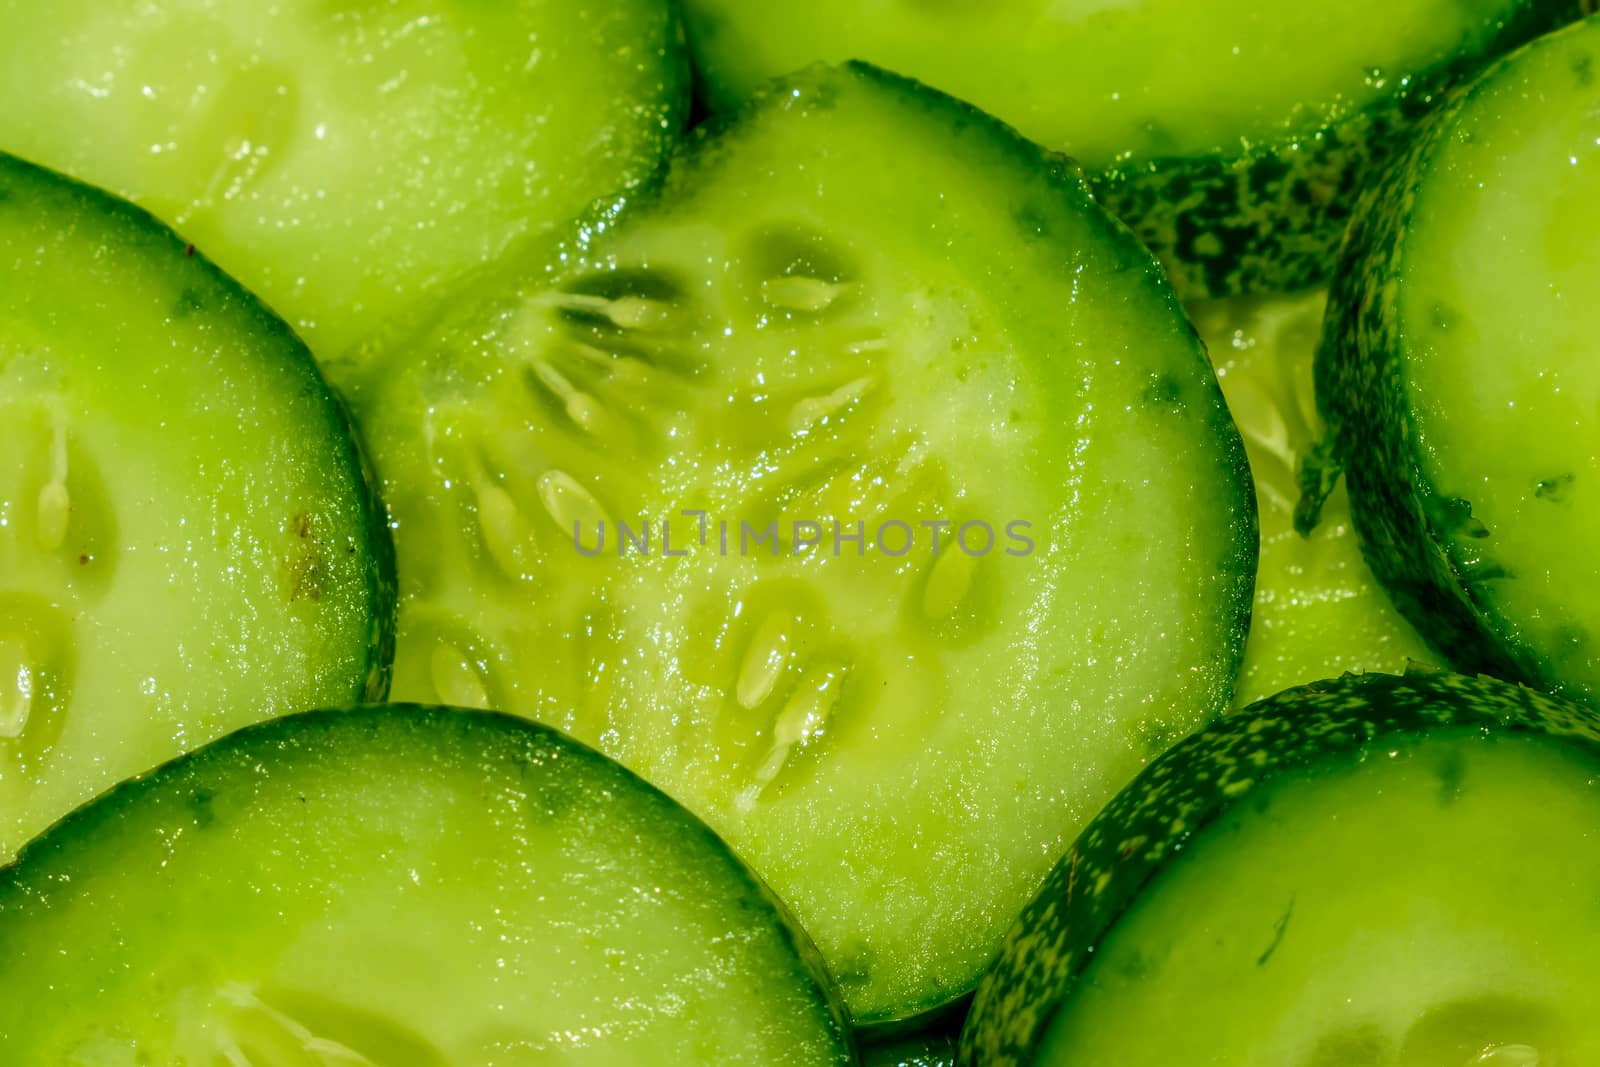 Cucumber and sliced background.